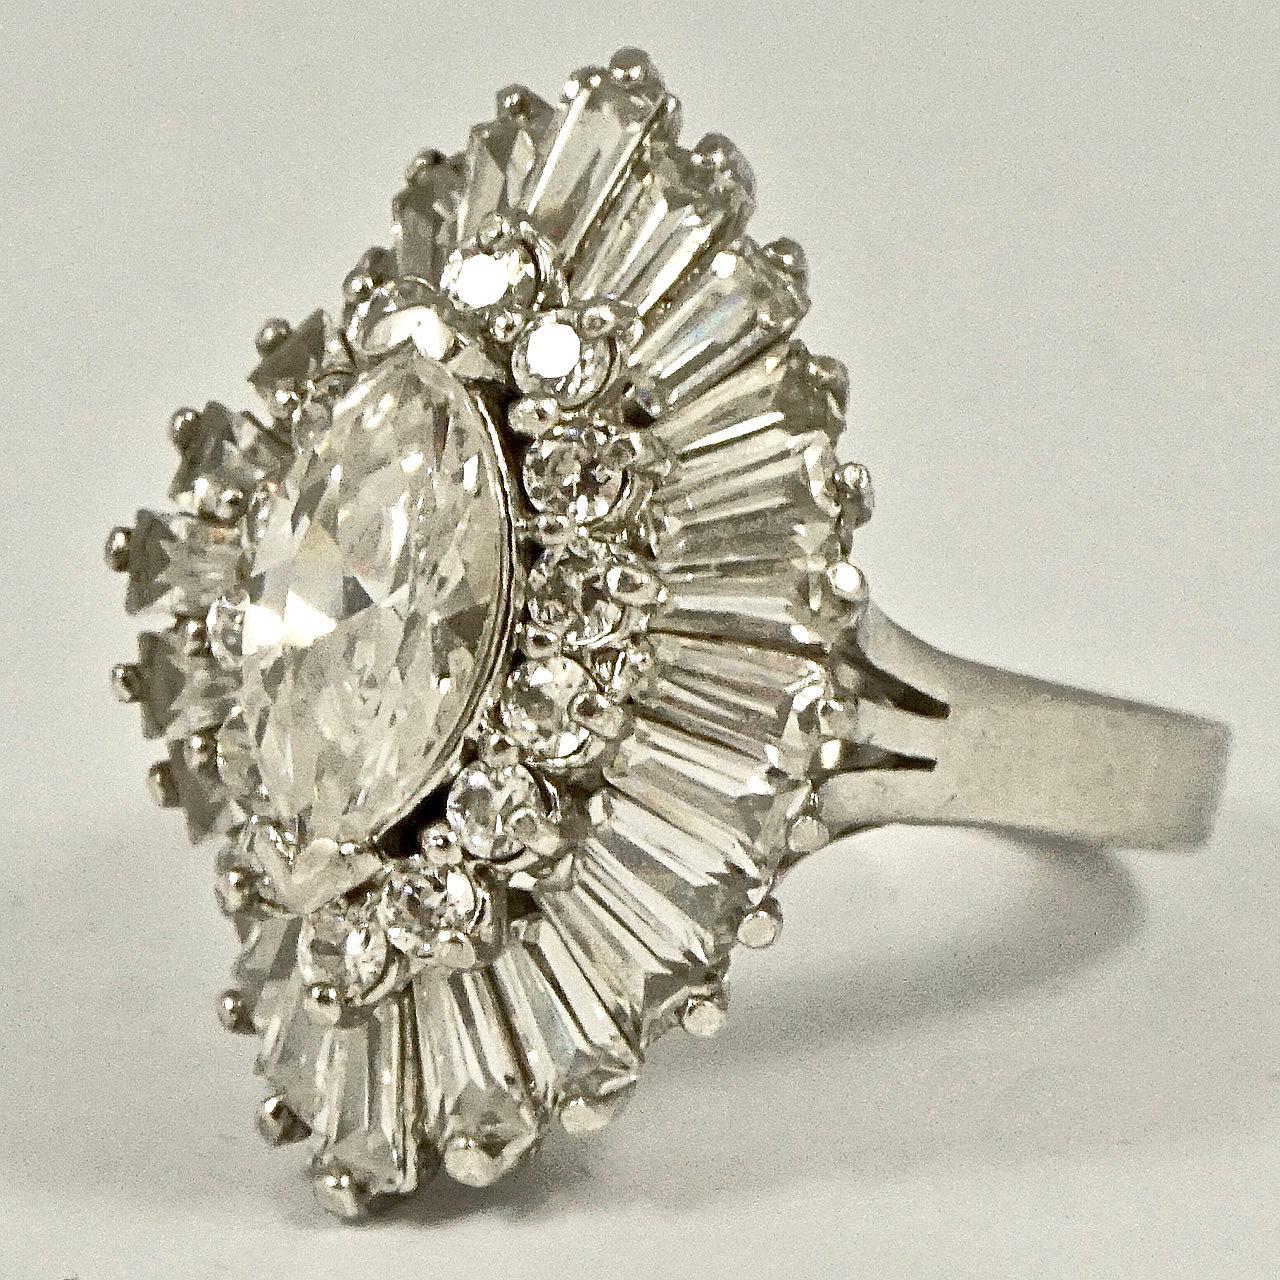 Stunning sterling silver cocktail ring, set with beautiful baguette and round rhinestones, and a centre marquise rhinestone. Ring size UK P 1/2,  US 7 3/4, inside diameter 1.9cm. Measuring length 2.8cm / 1.1 inch by width 2cm / .78 inch. The silver